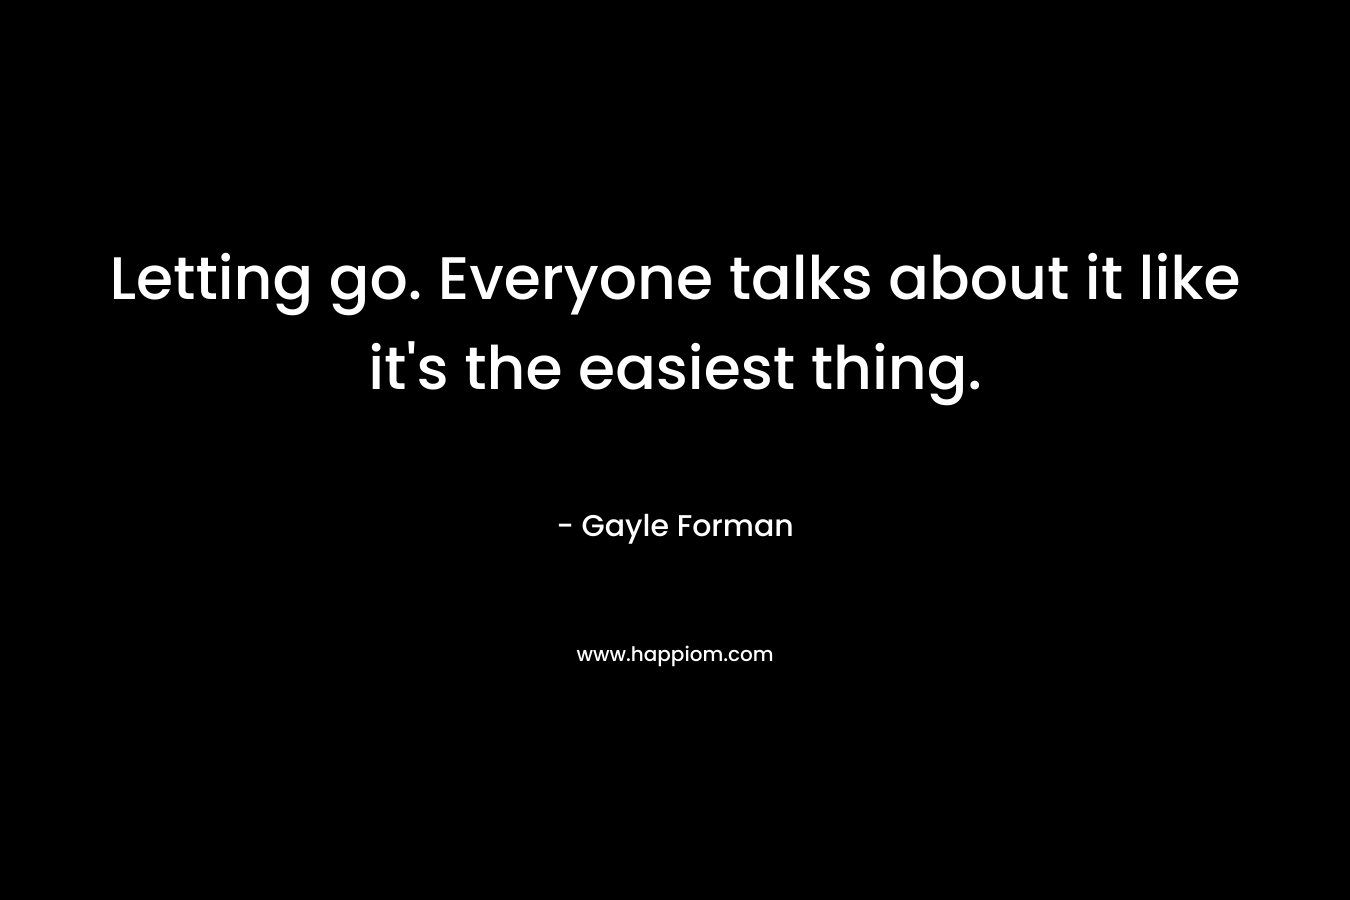 Letting go. Everyone talks about it like it’s the easiest thing. – Gayle Forman